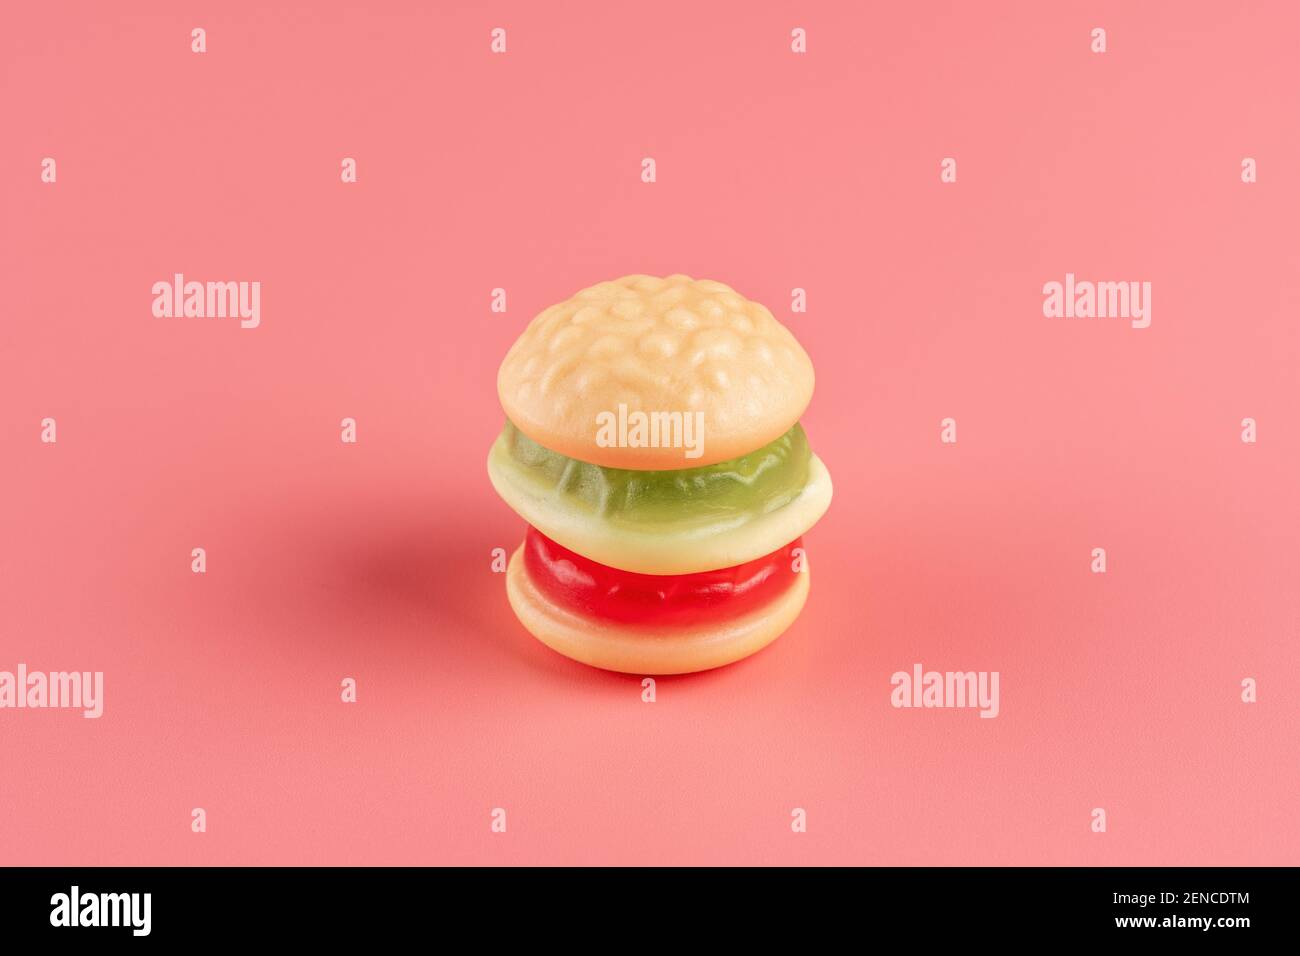 Colorful candy hamburger on pink background. Minimal food concept. Stock Photo